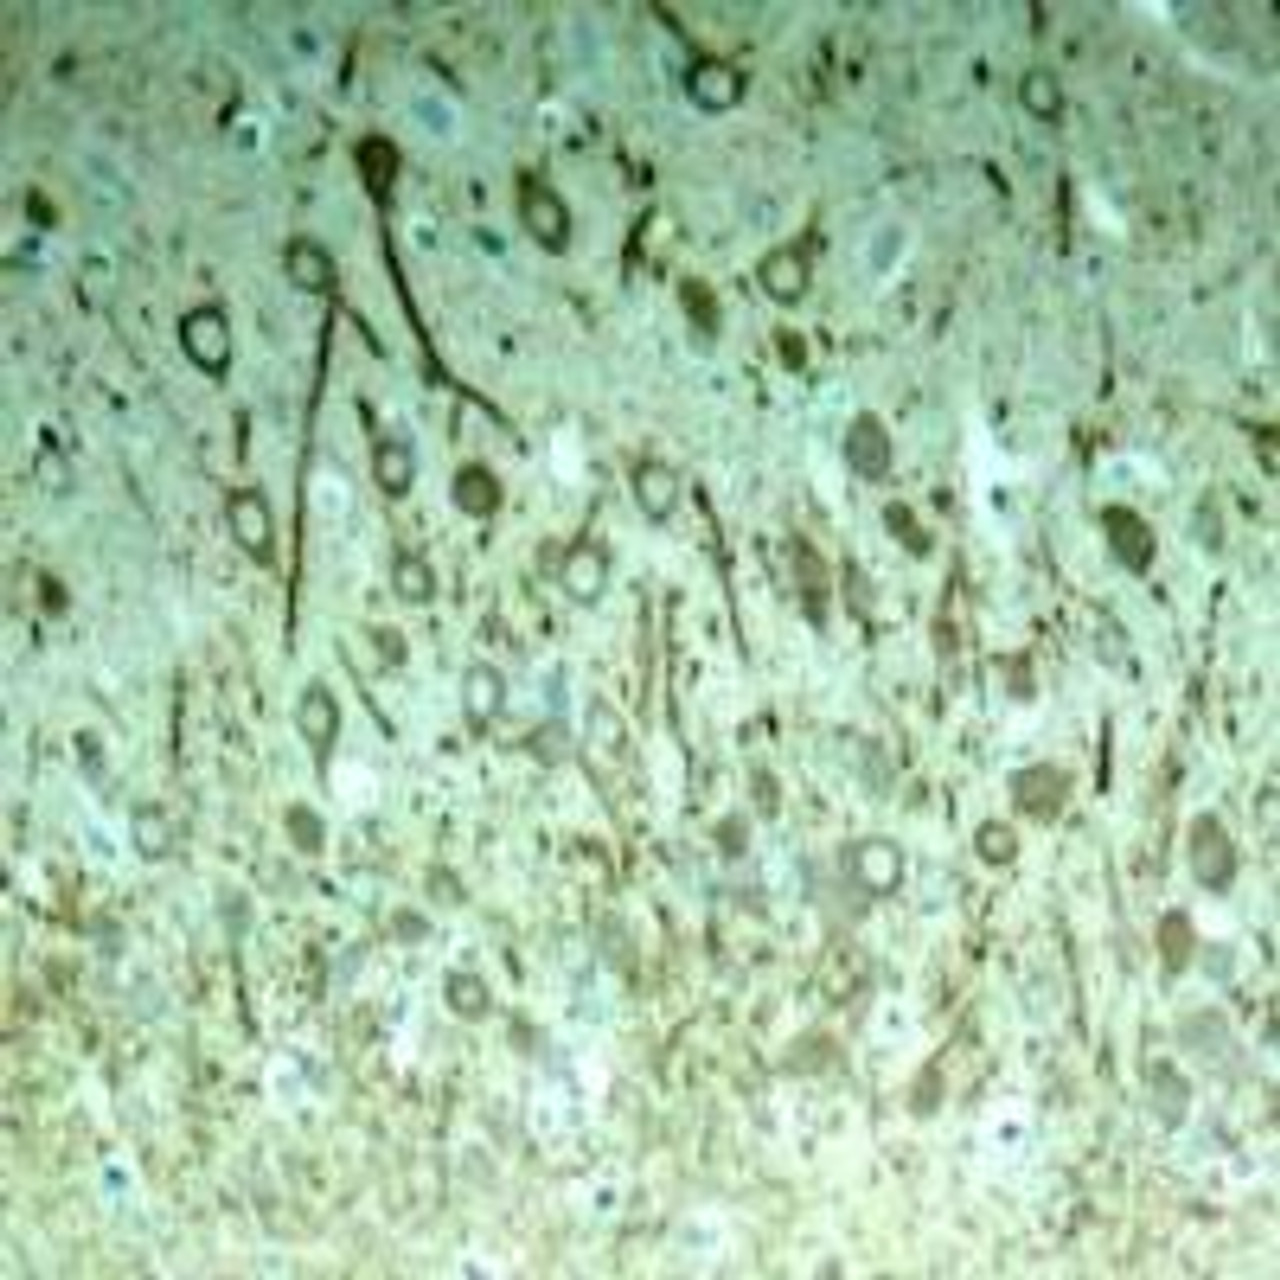 Immunohistochemical analysis of paraffin-embedded rat hippocampal region tissue from a model with Alzheimer’s Disease using Tau (Phospho-Thr231) .